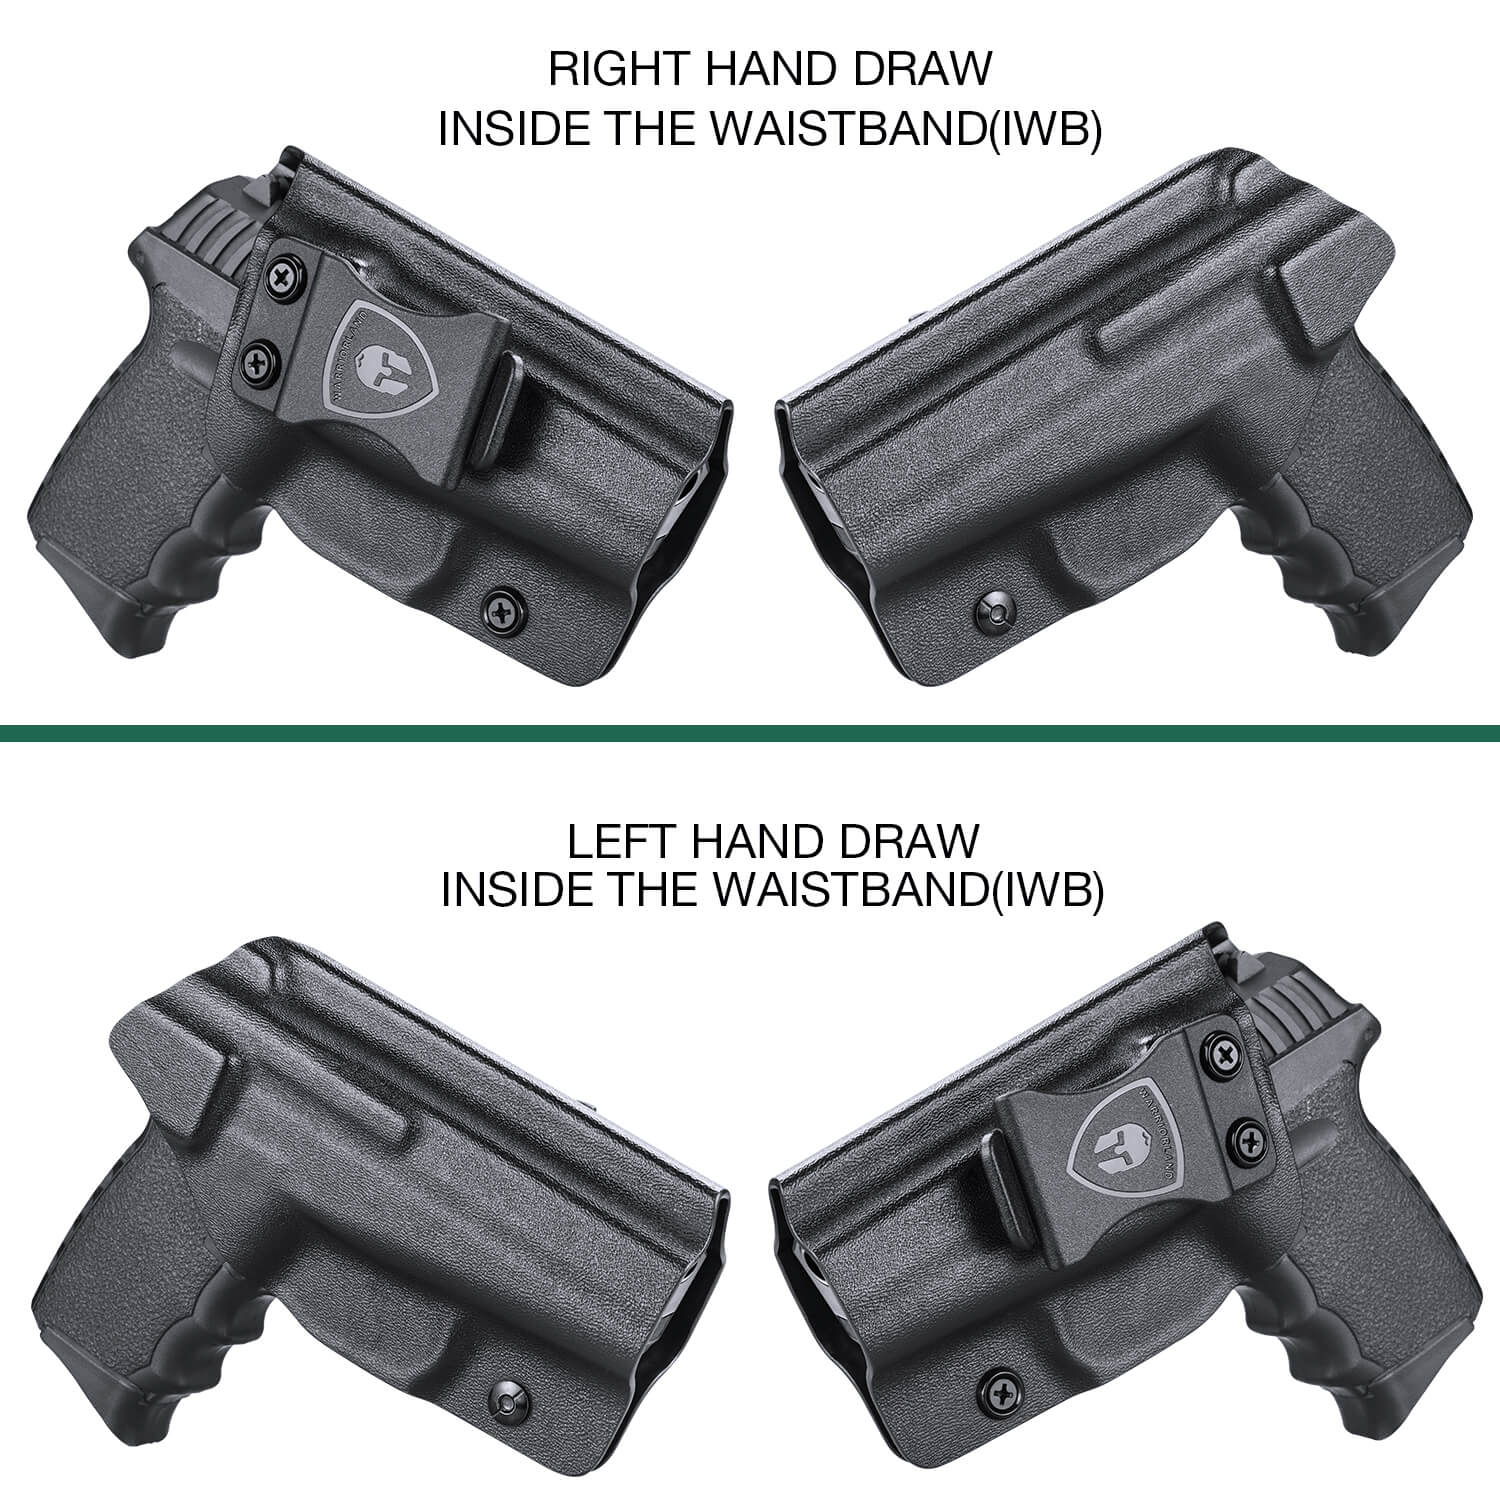 SCCY CPX 1 2 CPX-1 CPX-2 9mm Holster IWB Kydex